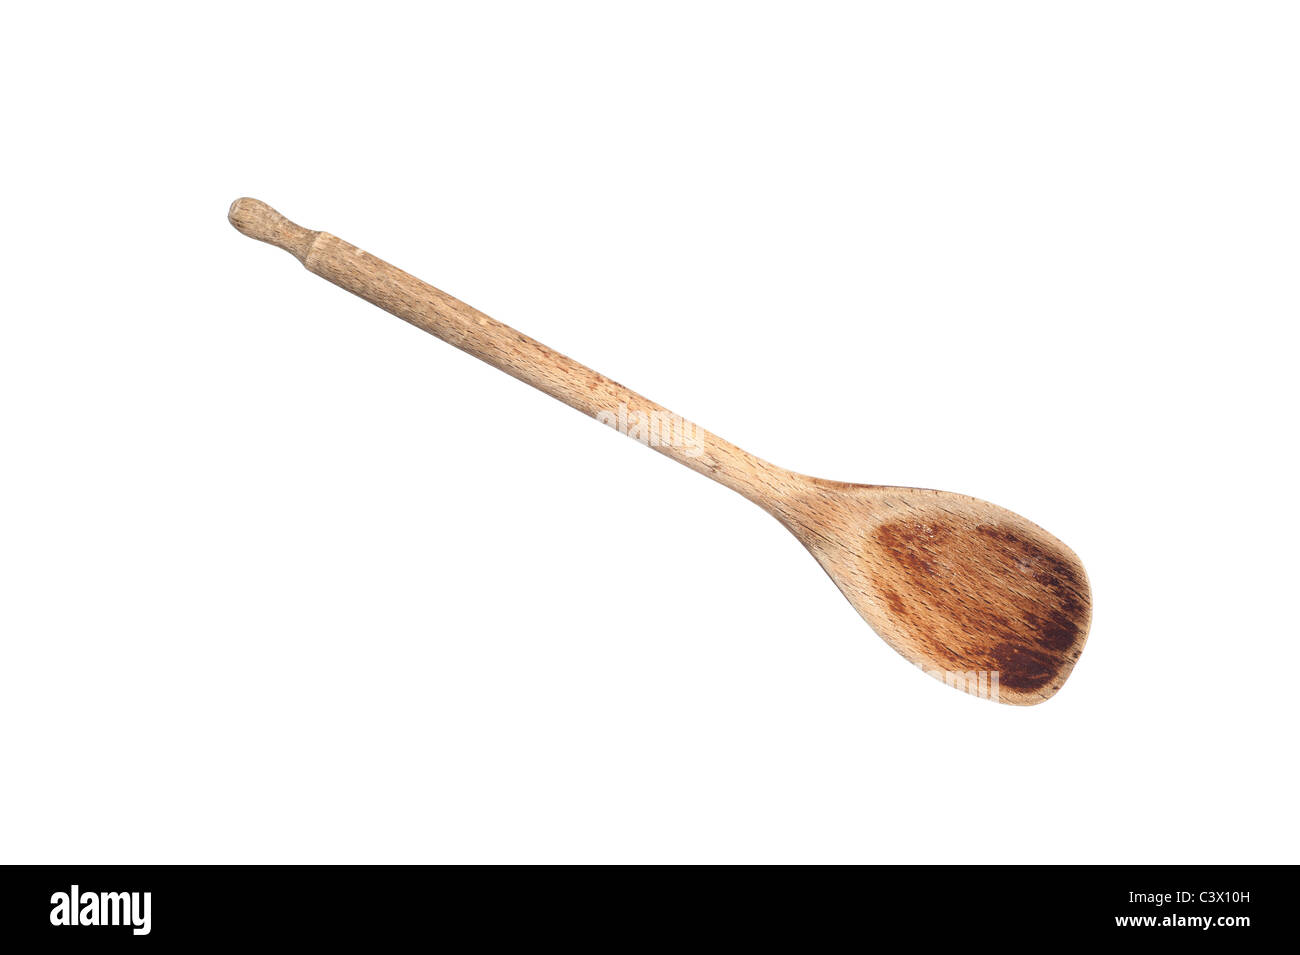 An old wooden cooking spoon isolated on white Stock Photo